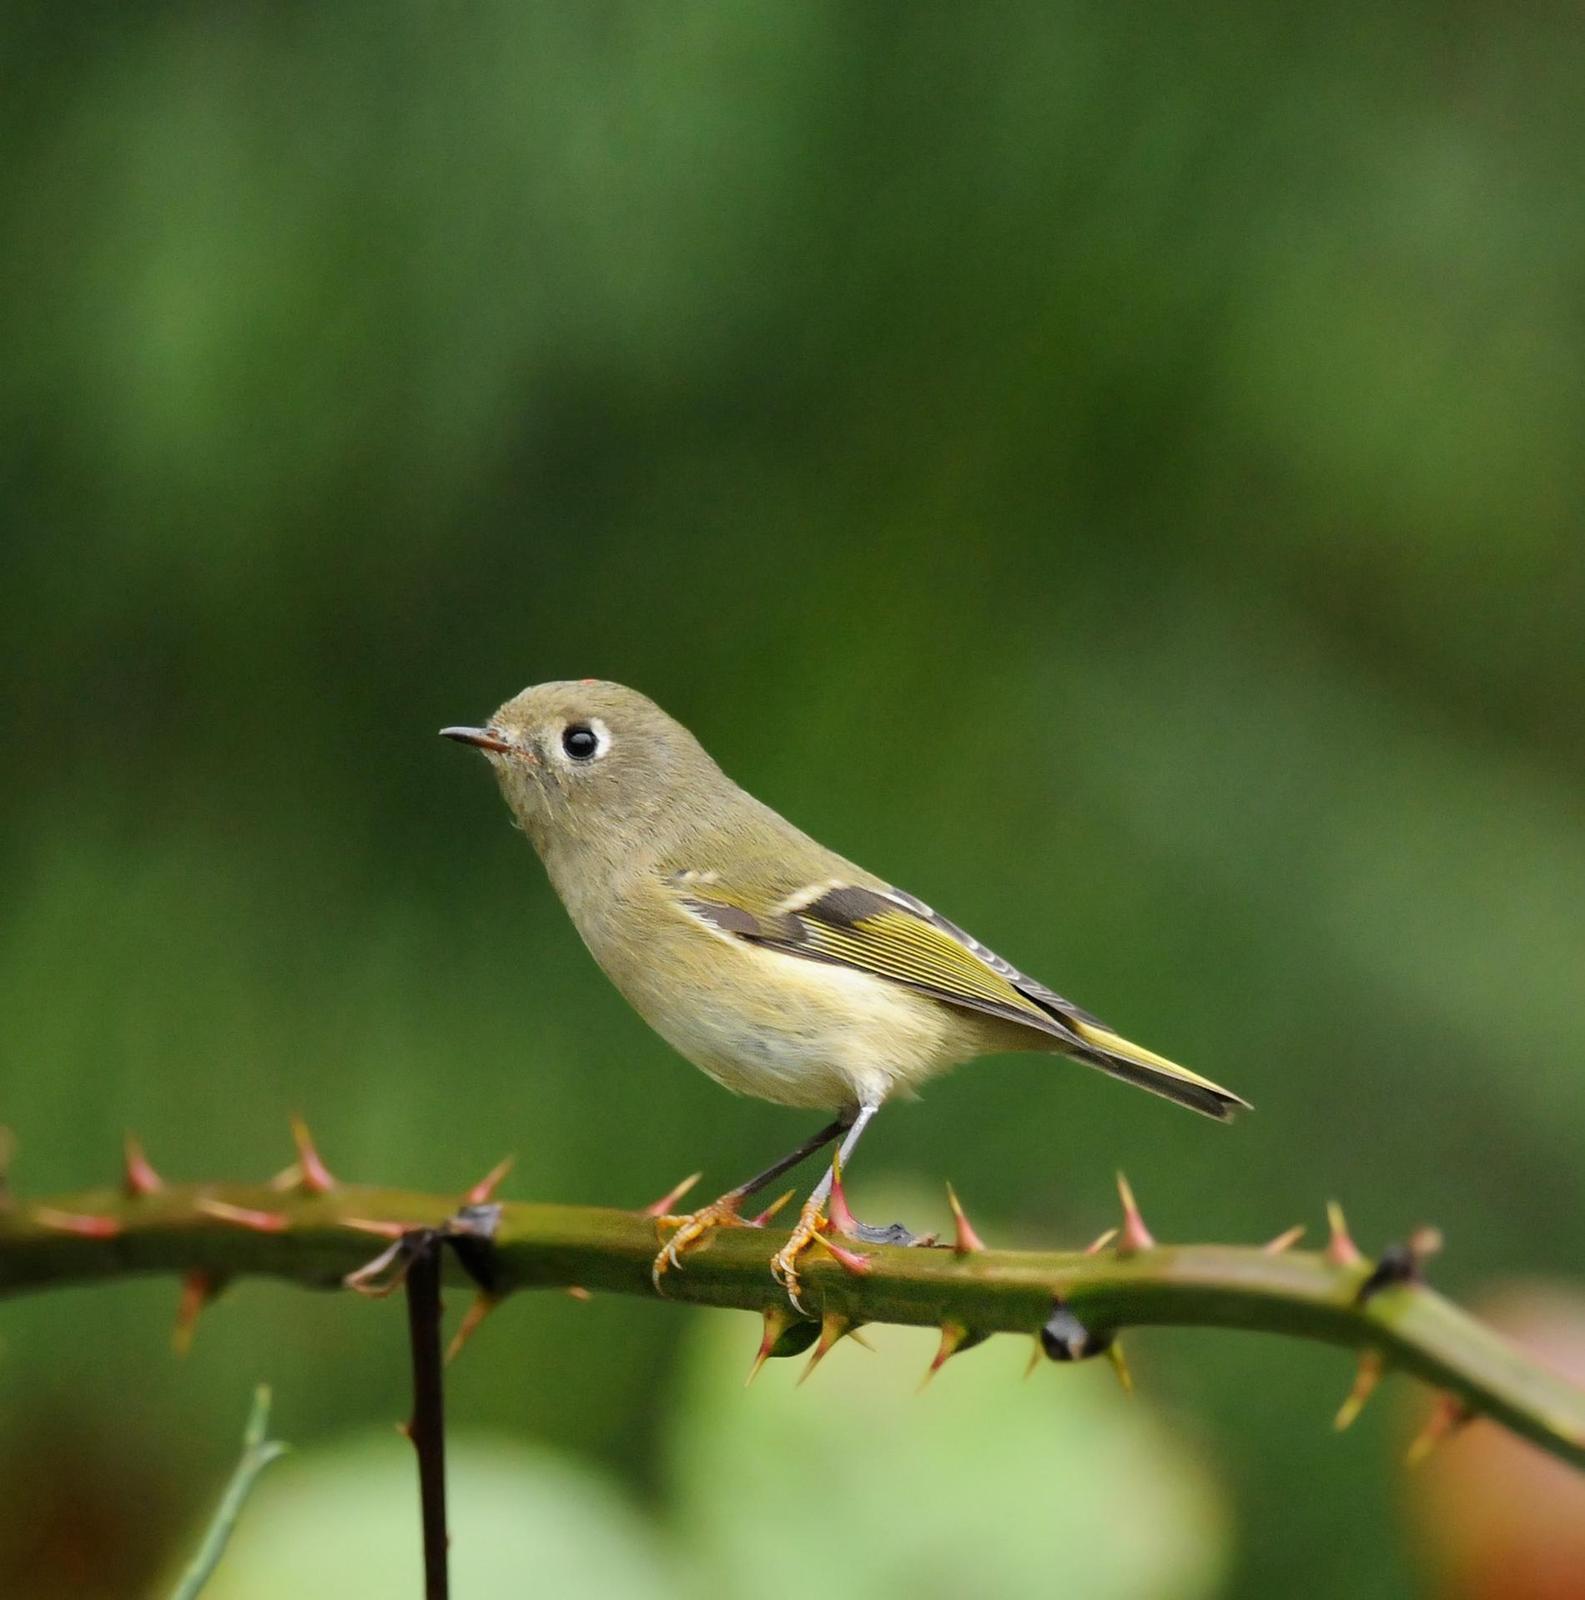 Ruby-crowned Kinglet Photo by Steven Mlodinow